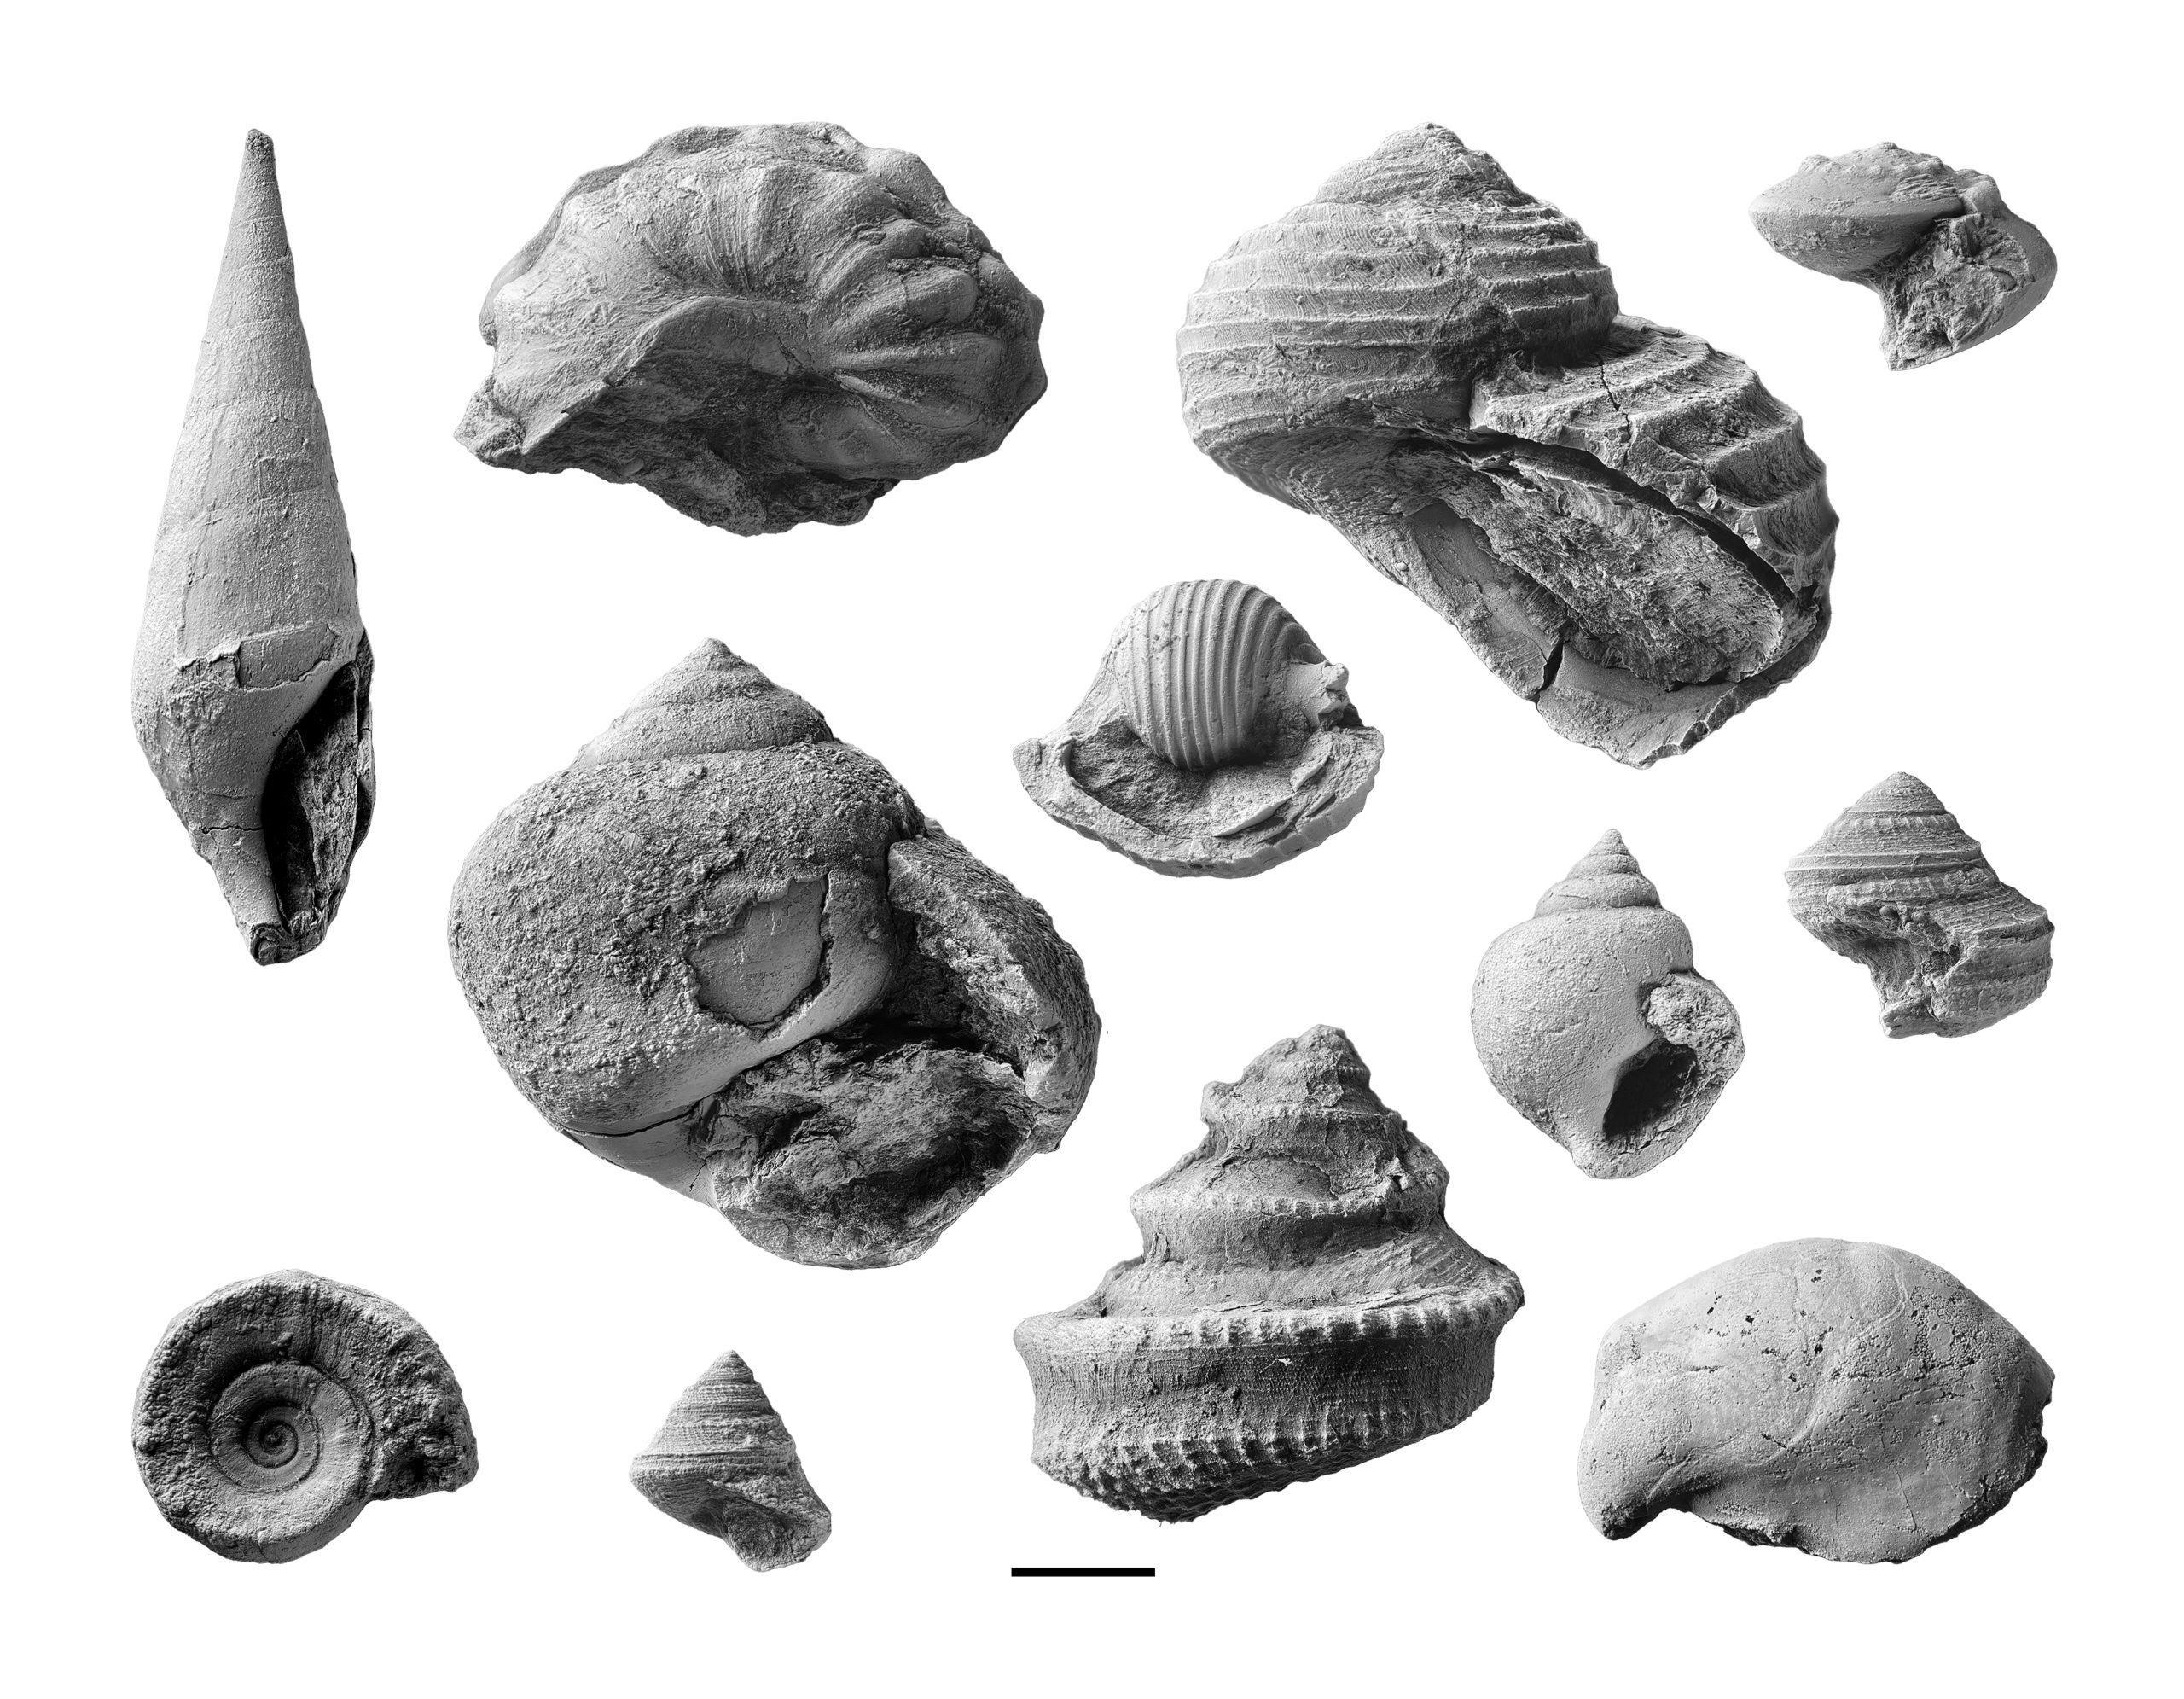 Paleozoic gastropods from Armstrong County, PA